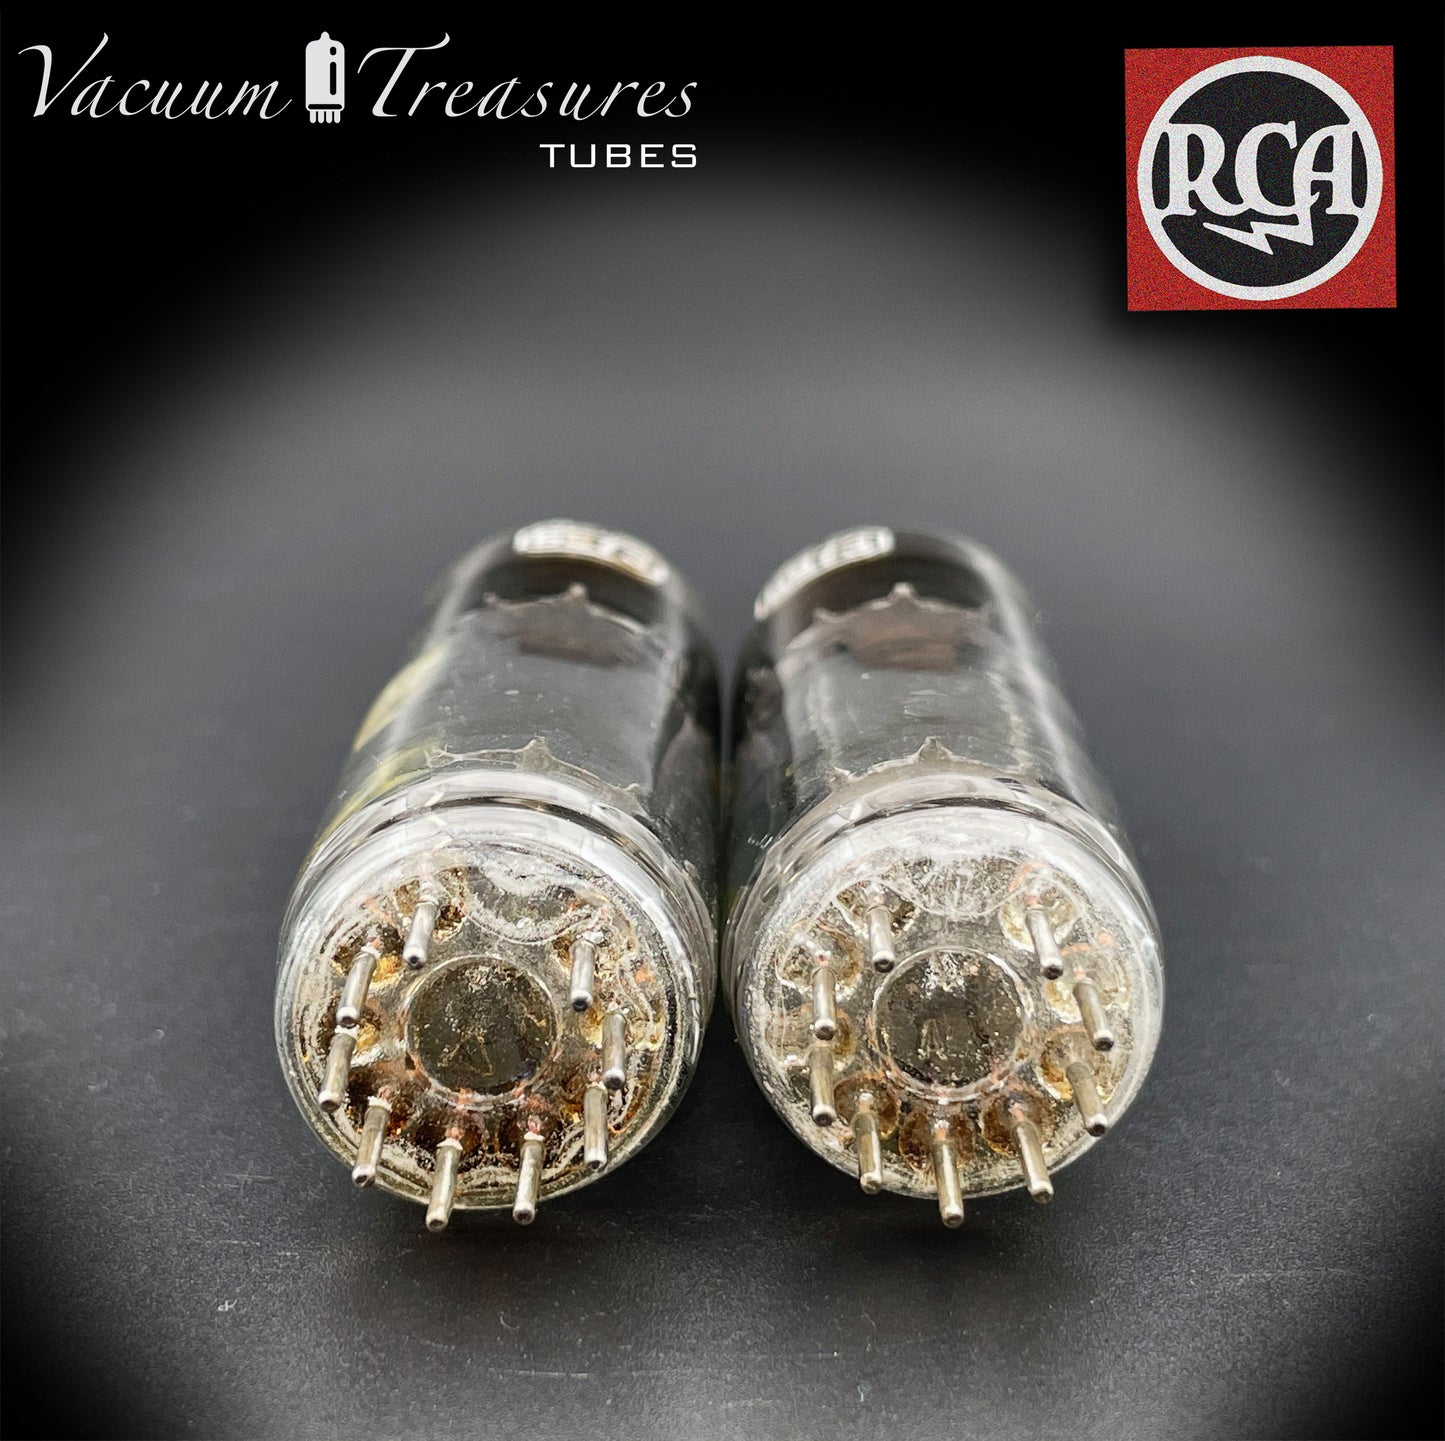 6973 RCA Black Plates Halo Getter Matched Pair Tubes Hergestellt in den USA